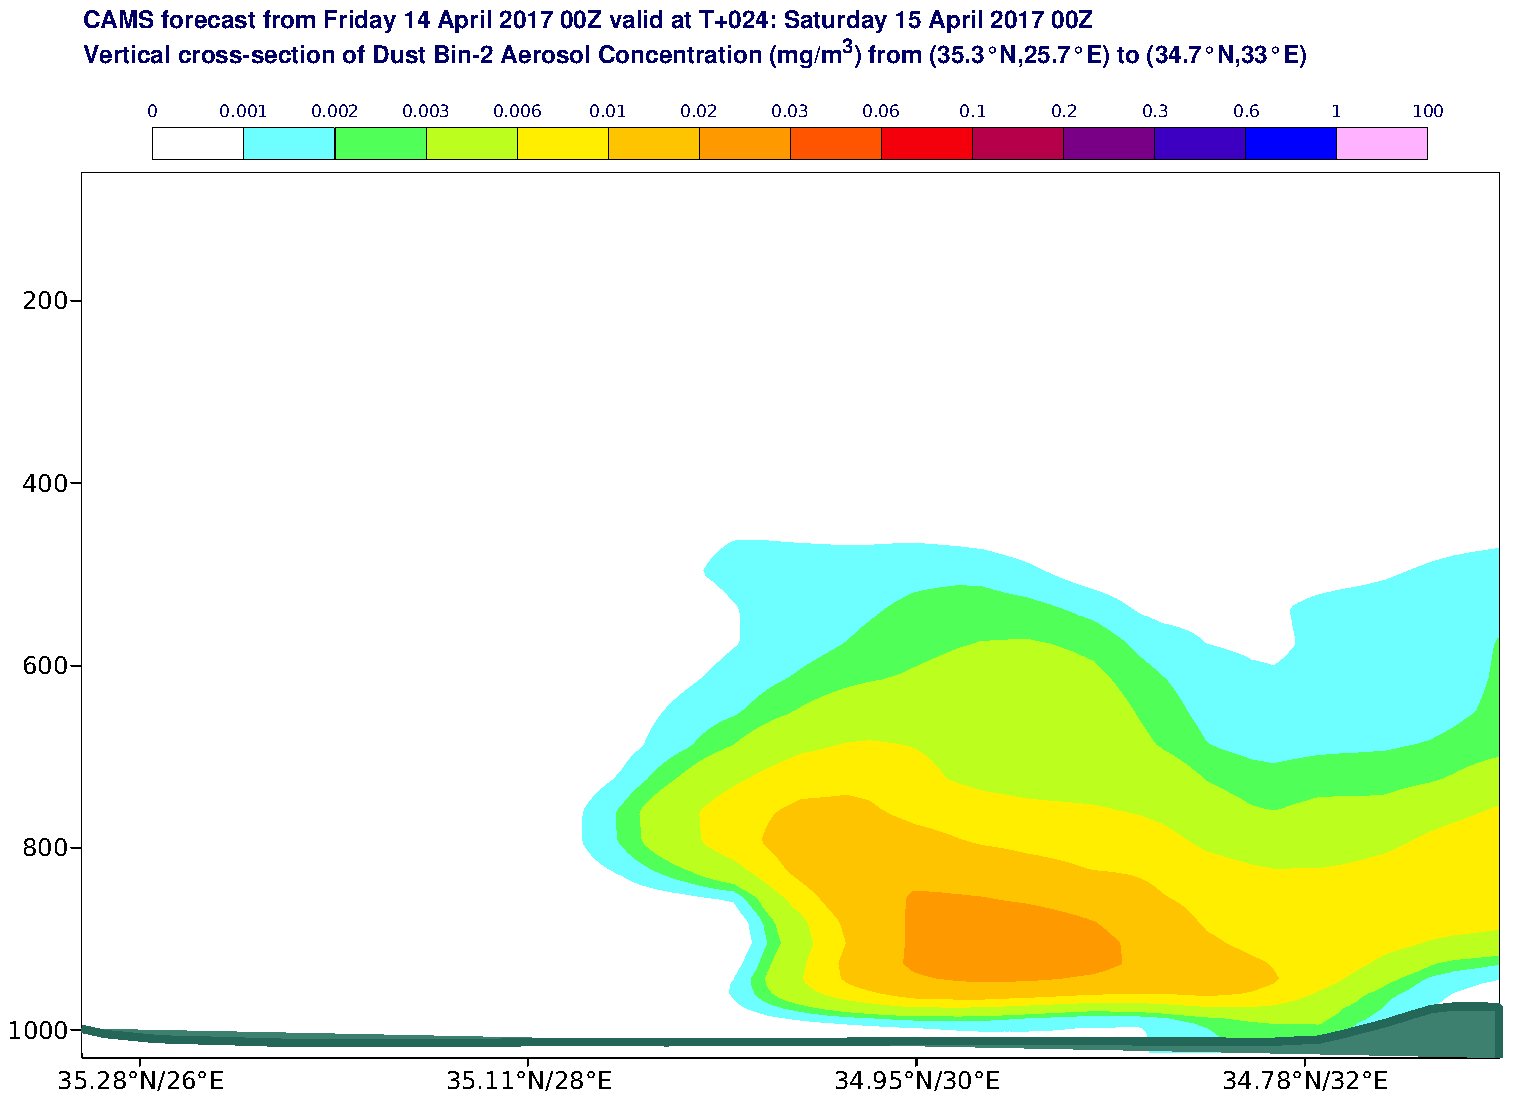 Vertical cross-section of Dust Bin-2 Aerosol Concentration (mg/m3) valid at T24 - 2017-04-15 00:00